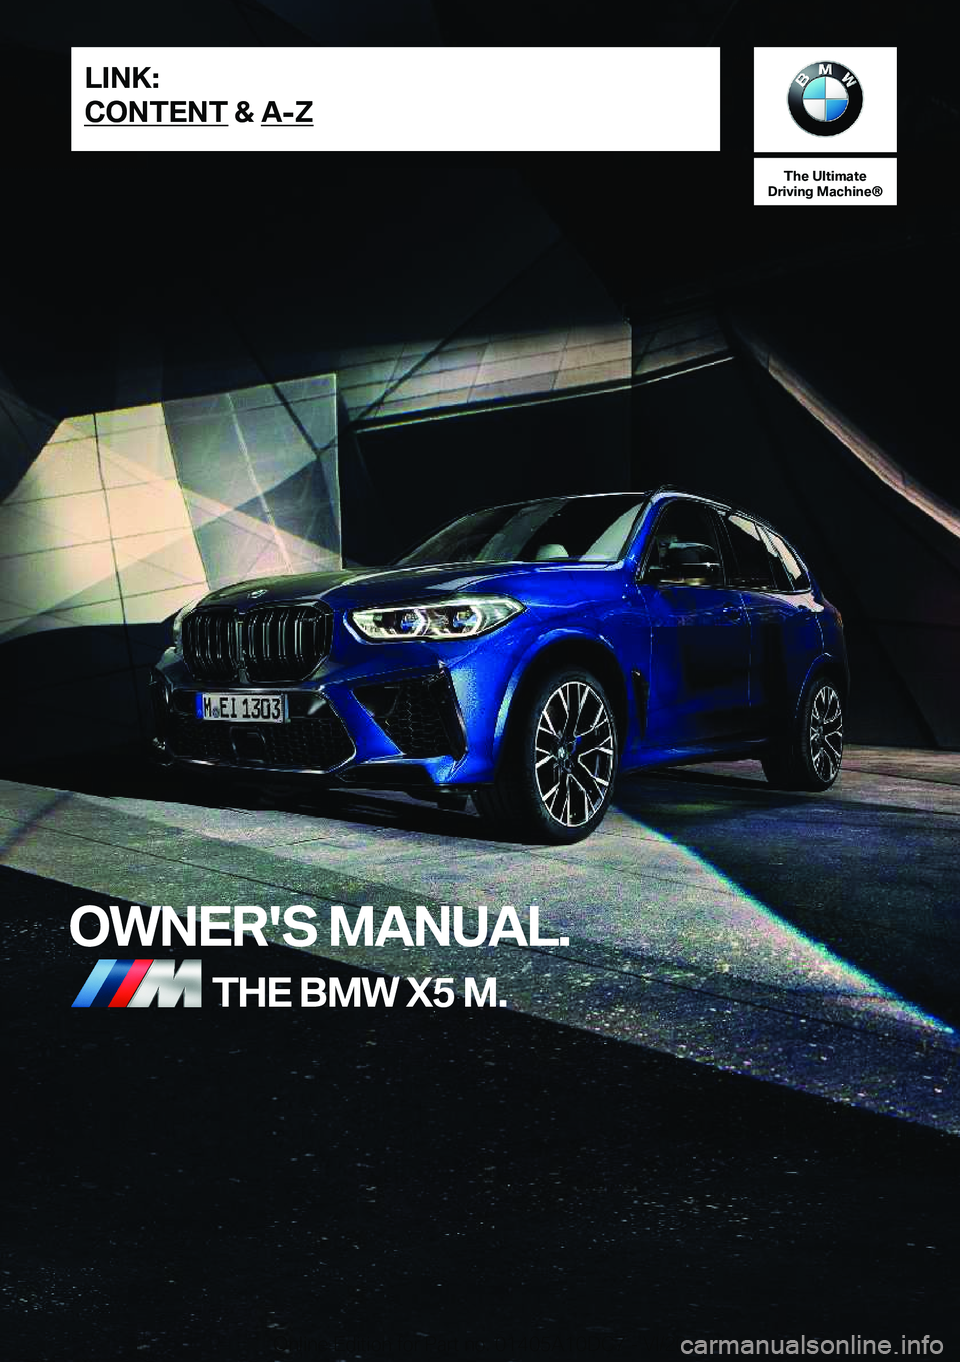 BMW X5M 2021  Owners Manual �T�h�e��U�l�t�i�m�a�t�e
�D�r�i�v�i�n�g��M�a�c�h�i�n�e�n
�O�W�N�E�R�'�S��M�A�N�U�A�L�.�T�H�E��B�M�W��X�5��M�.�L�I�N�K�:
�C�O�N�T�E�N�T��&��A�-�Z�O�n�l�i�n�e��E�d�i�t�i�o�n��f�o�r��P�a�r�